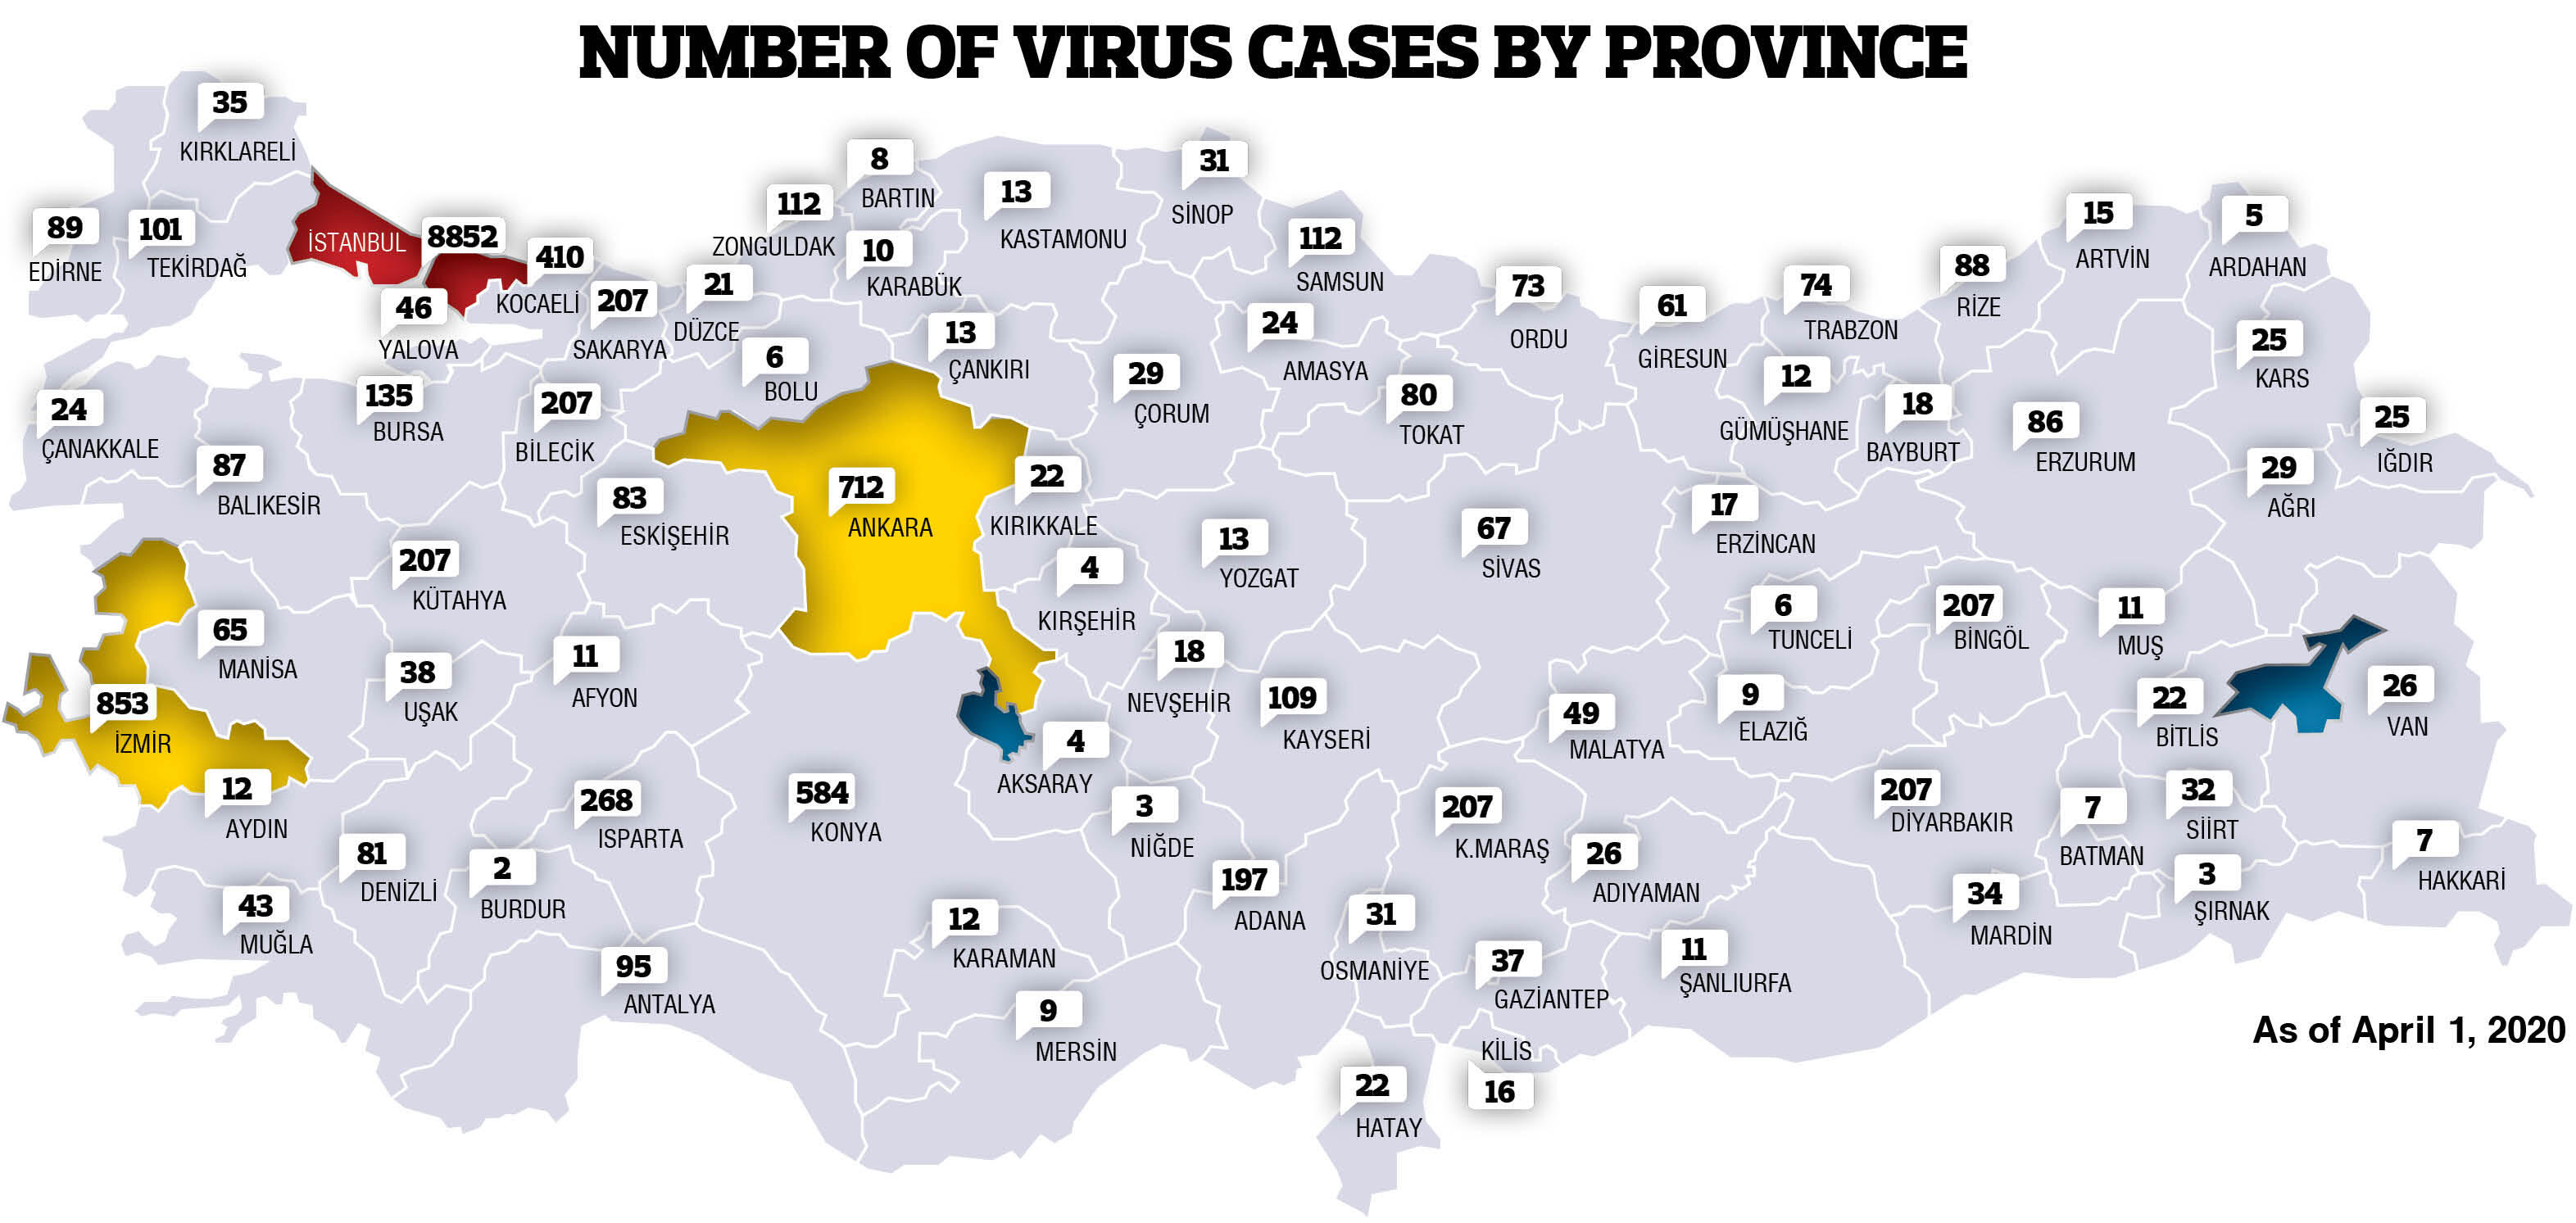 Coronavirus death toll reaches 1,643 with 74,193 total cases in Turkey